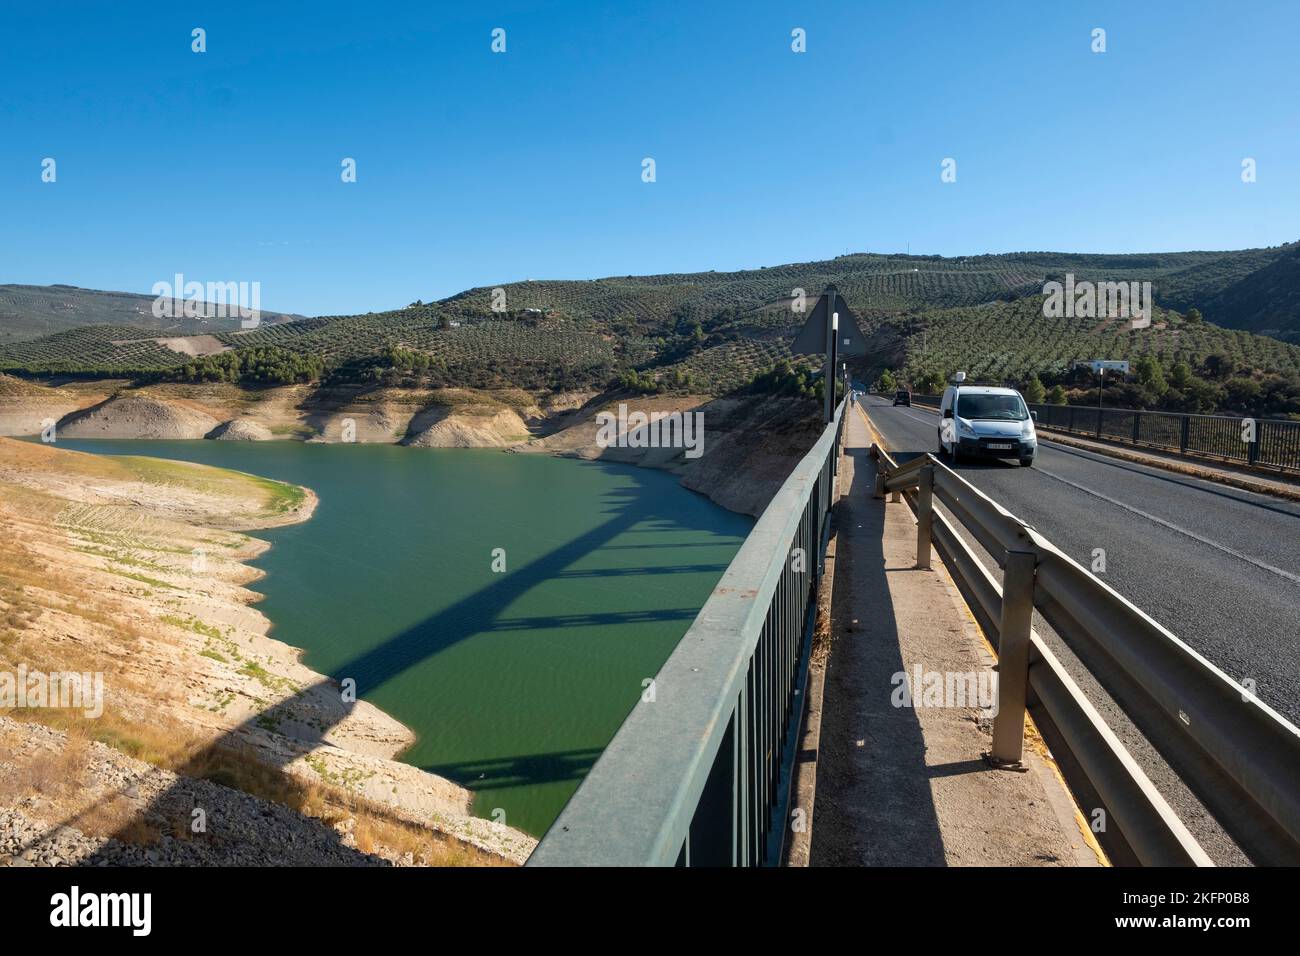 Drought conditions showing 15% water level in Iznajar Embalse, the largest reservoir in Andalucia, from Iznajar bridge, southern Spain Stock Photo